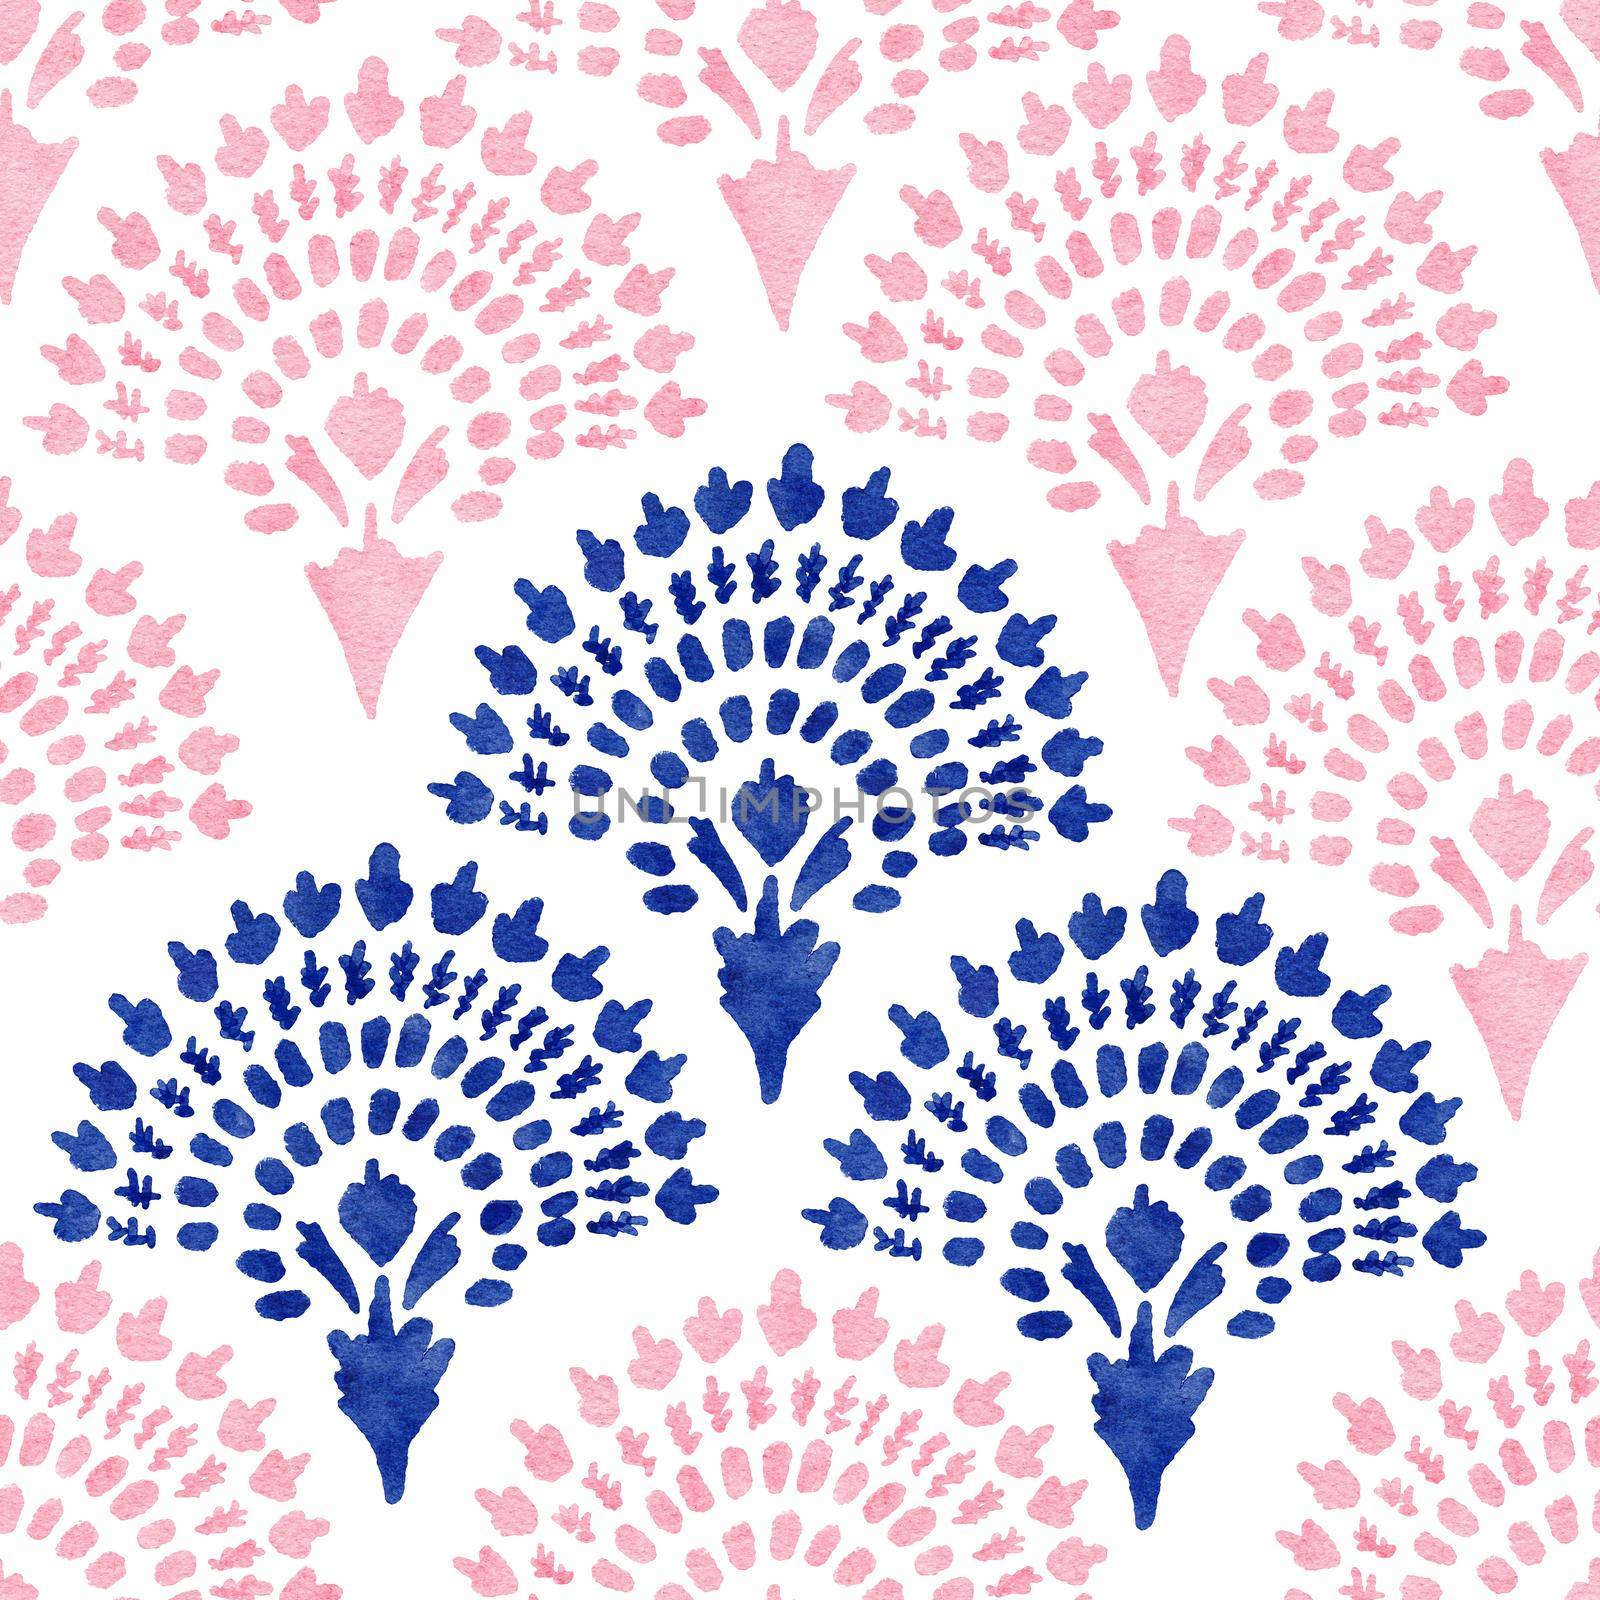 Hand drawn watercolor seamless pattern with navy blush boho elements. Bohemian blue pink fabric print, indigo rose geometric abstract shapes, ethnic design. For wedding invitation, gender reveal cards decor wallpaper. by Lagmar